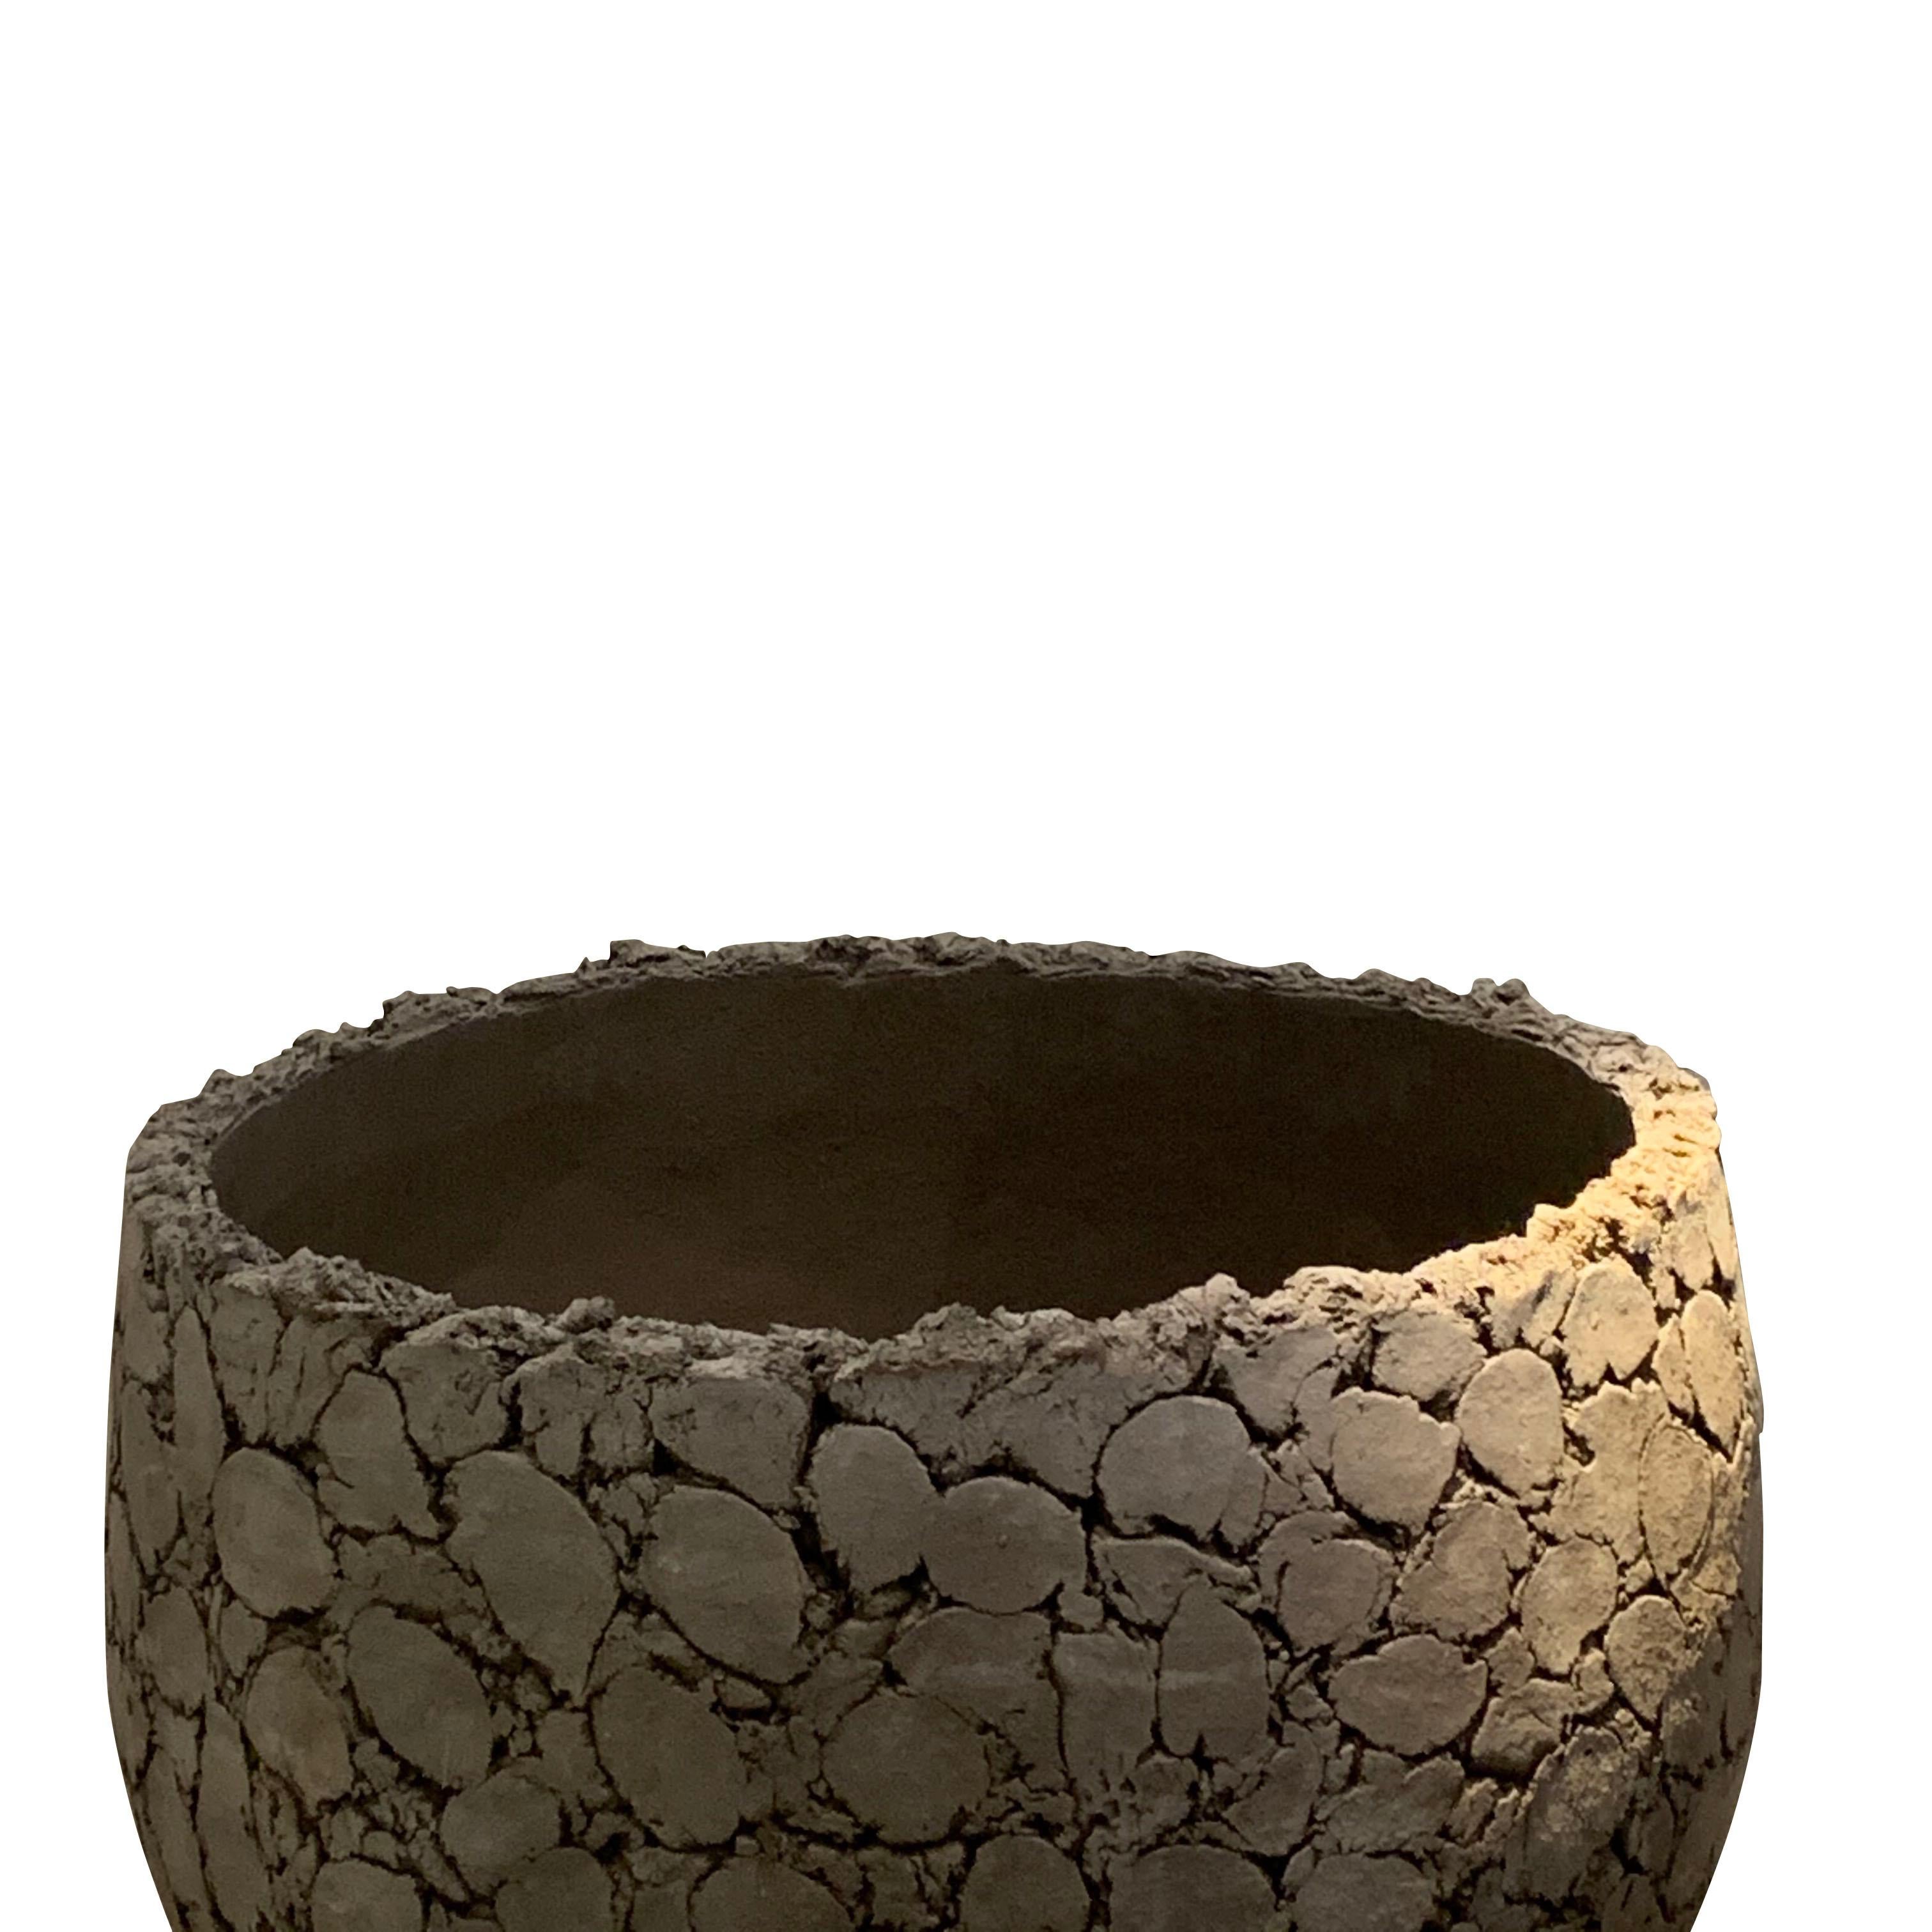 Contemporary Belgian pair extra large planters made of terracotta
Cork like texture design
Dark brown in color.
